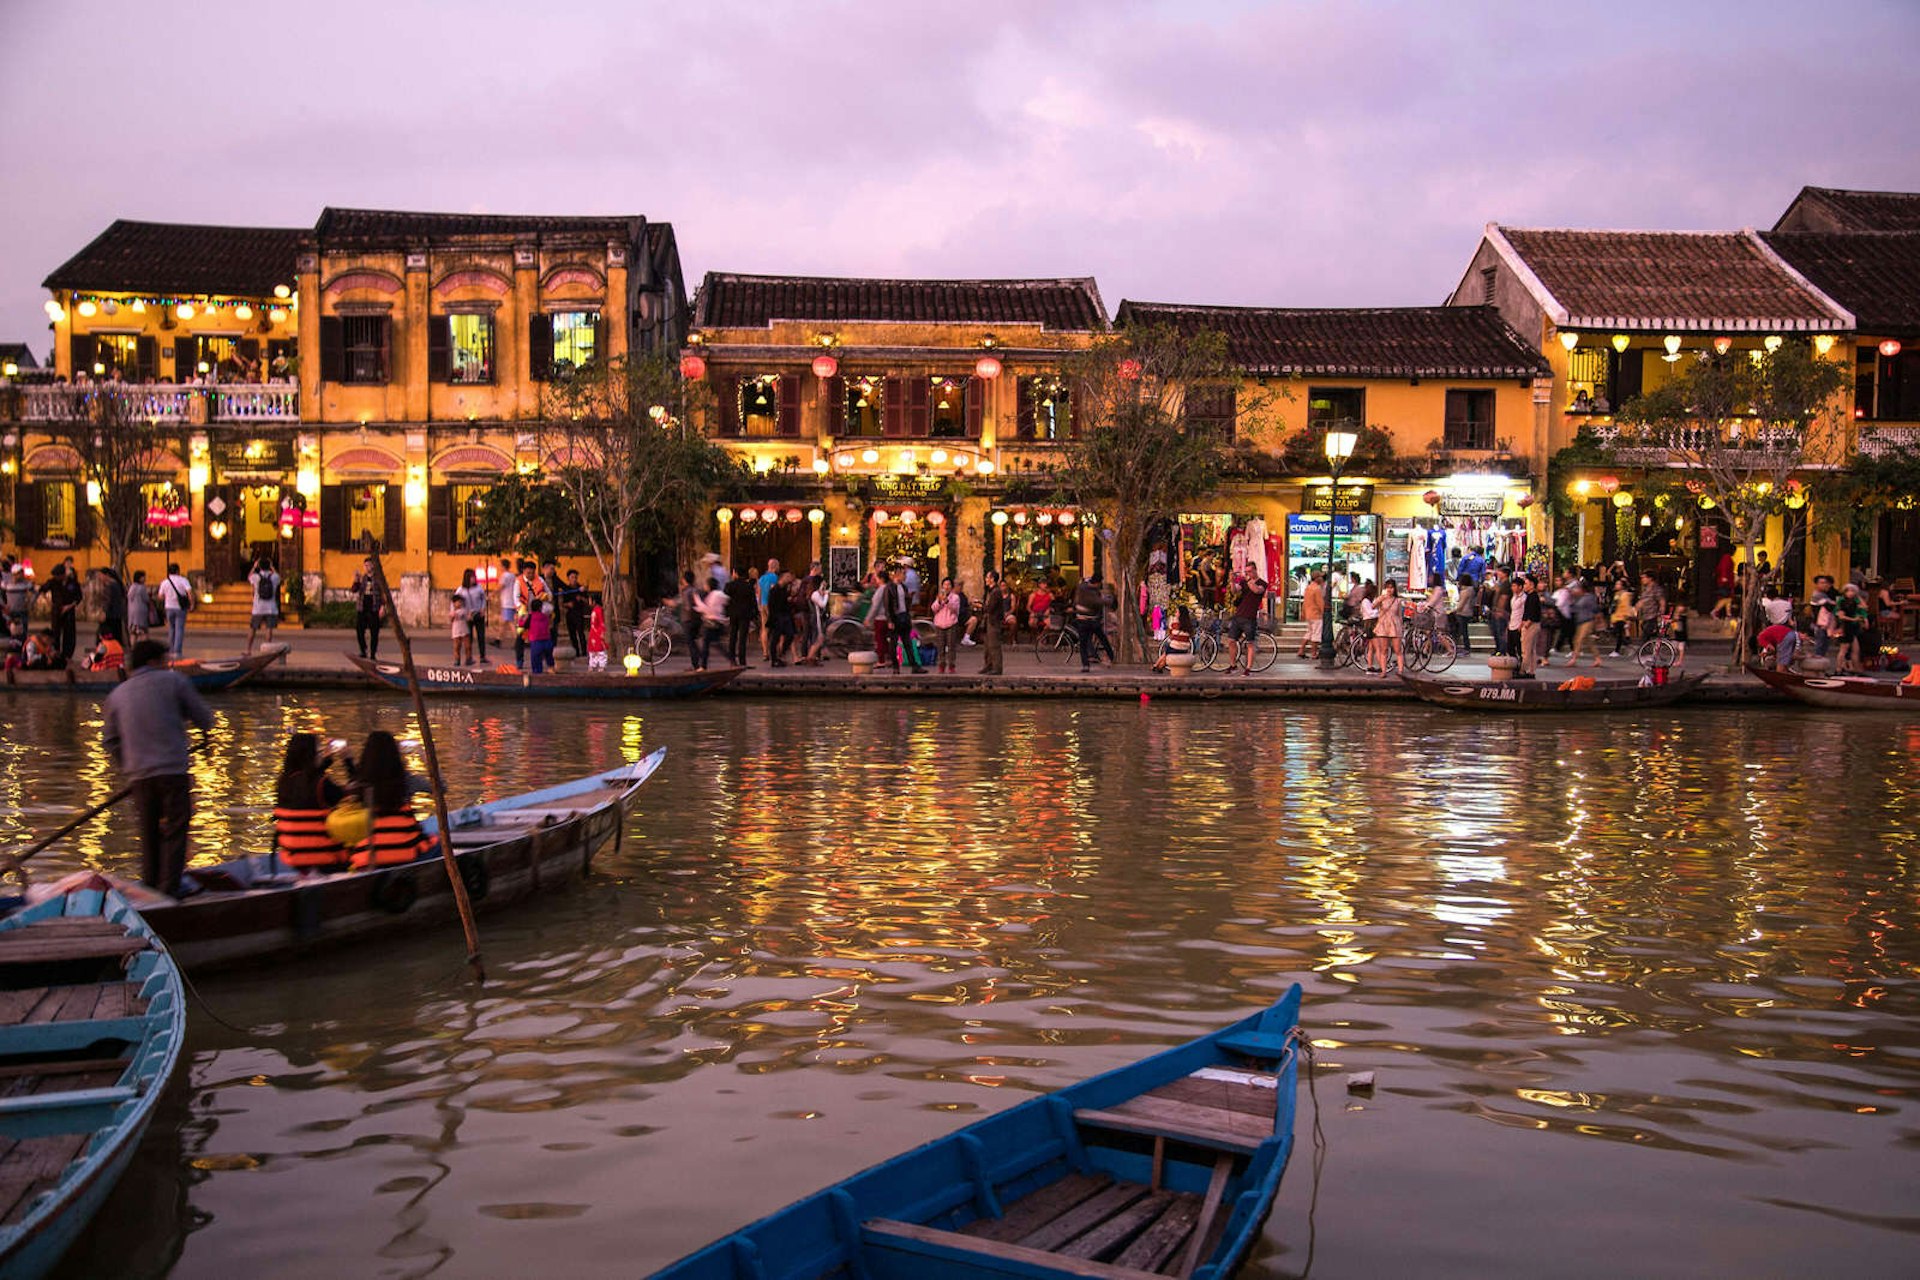 The Old Town of Hoi An viewed at dusk as lights twinkle off the river